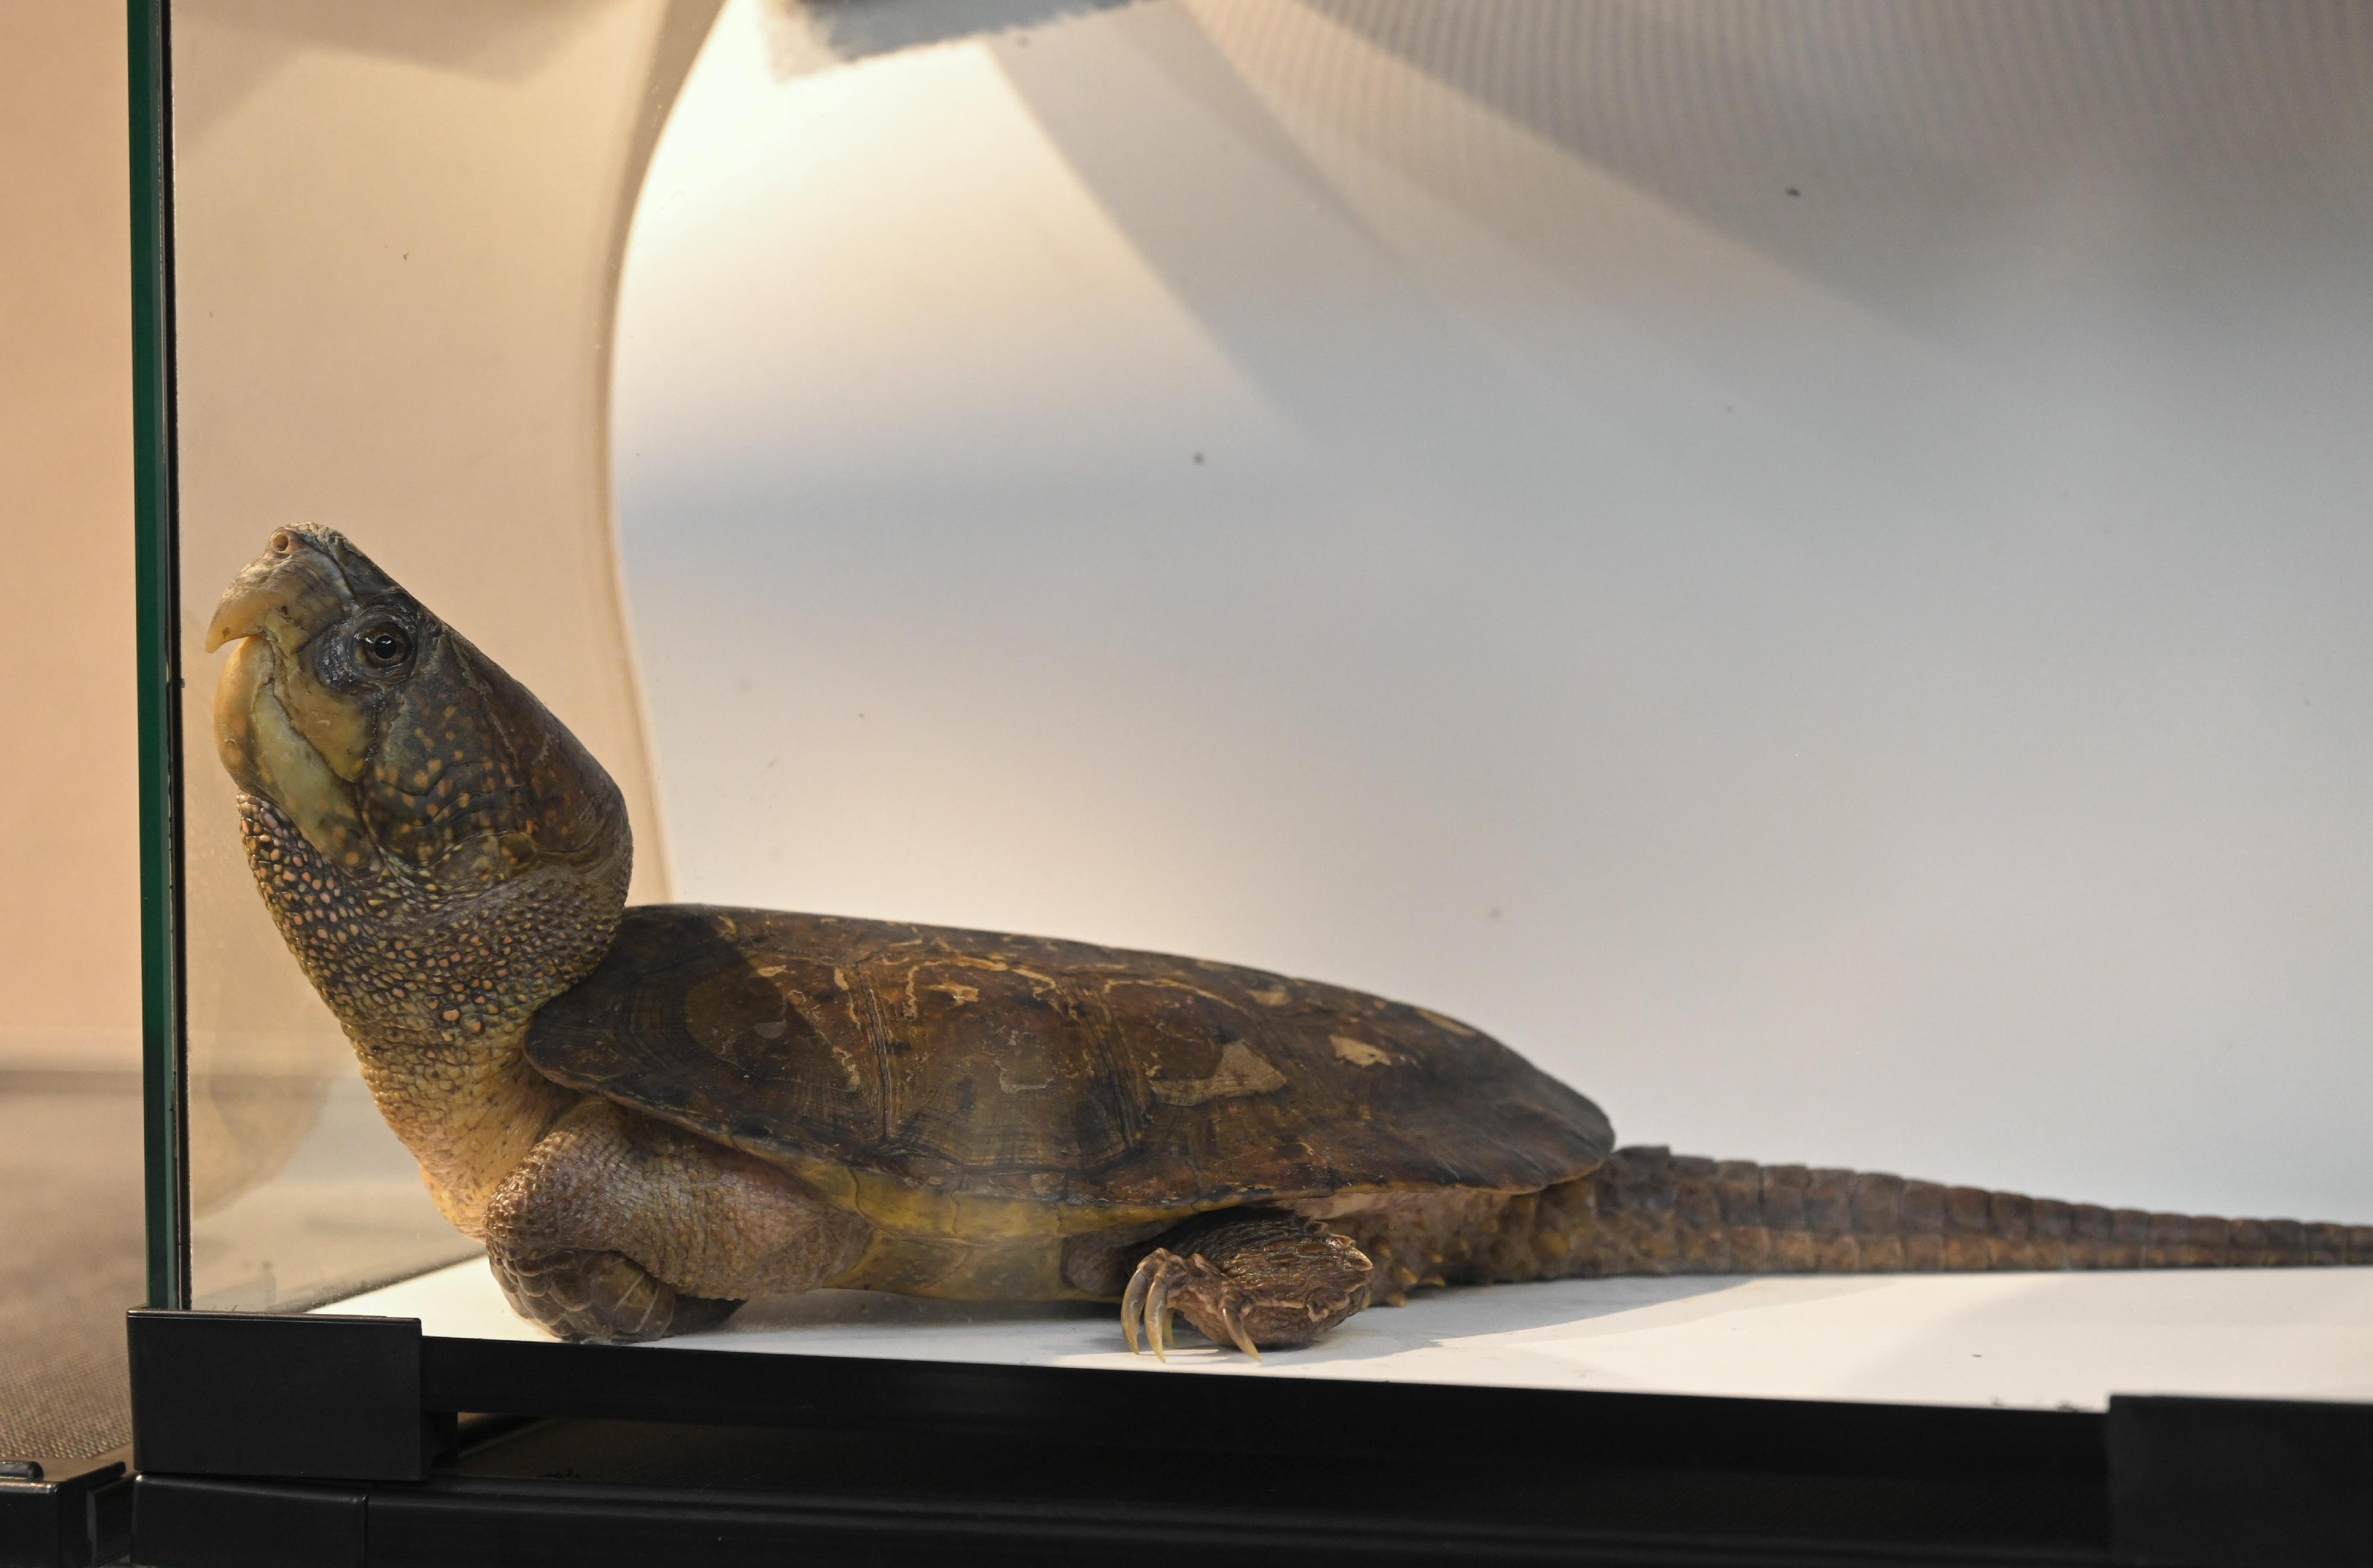 The Agriculture, Fisheries and Conservation Department conducted a joint operation with the Police on July 19. Twenty-nine specimens of endangered turtles, seven suspected turtle eggs and some tools suspected for hunting purposes were seized on some premises in Tai Po and a male suspect was arrested. Photo shows one of the seized big-headed turtles (Platysternon megacephalum).